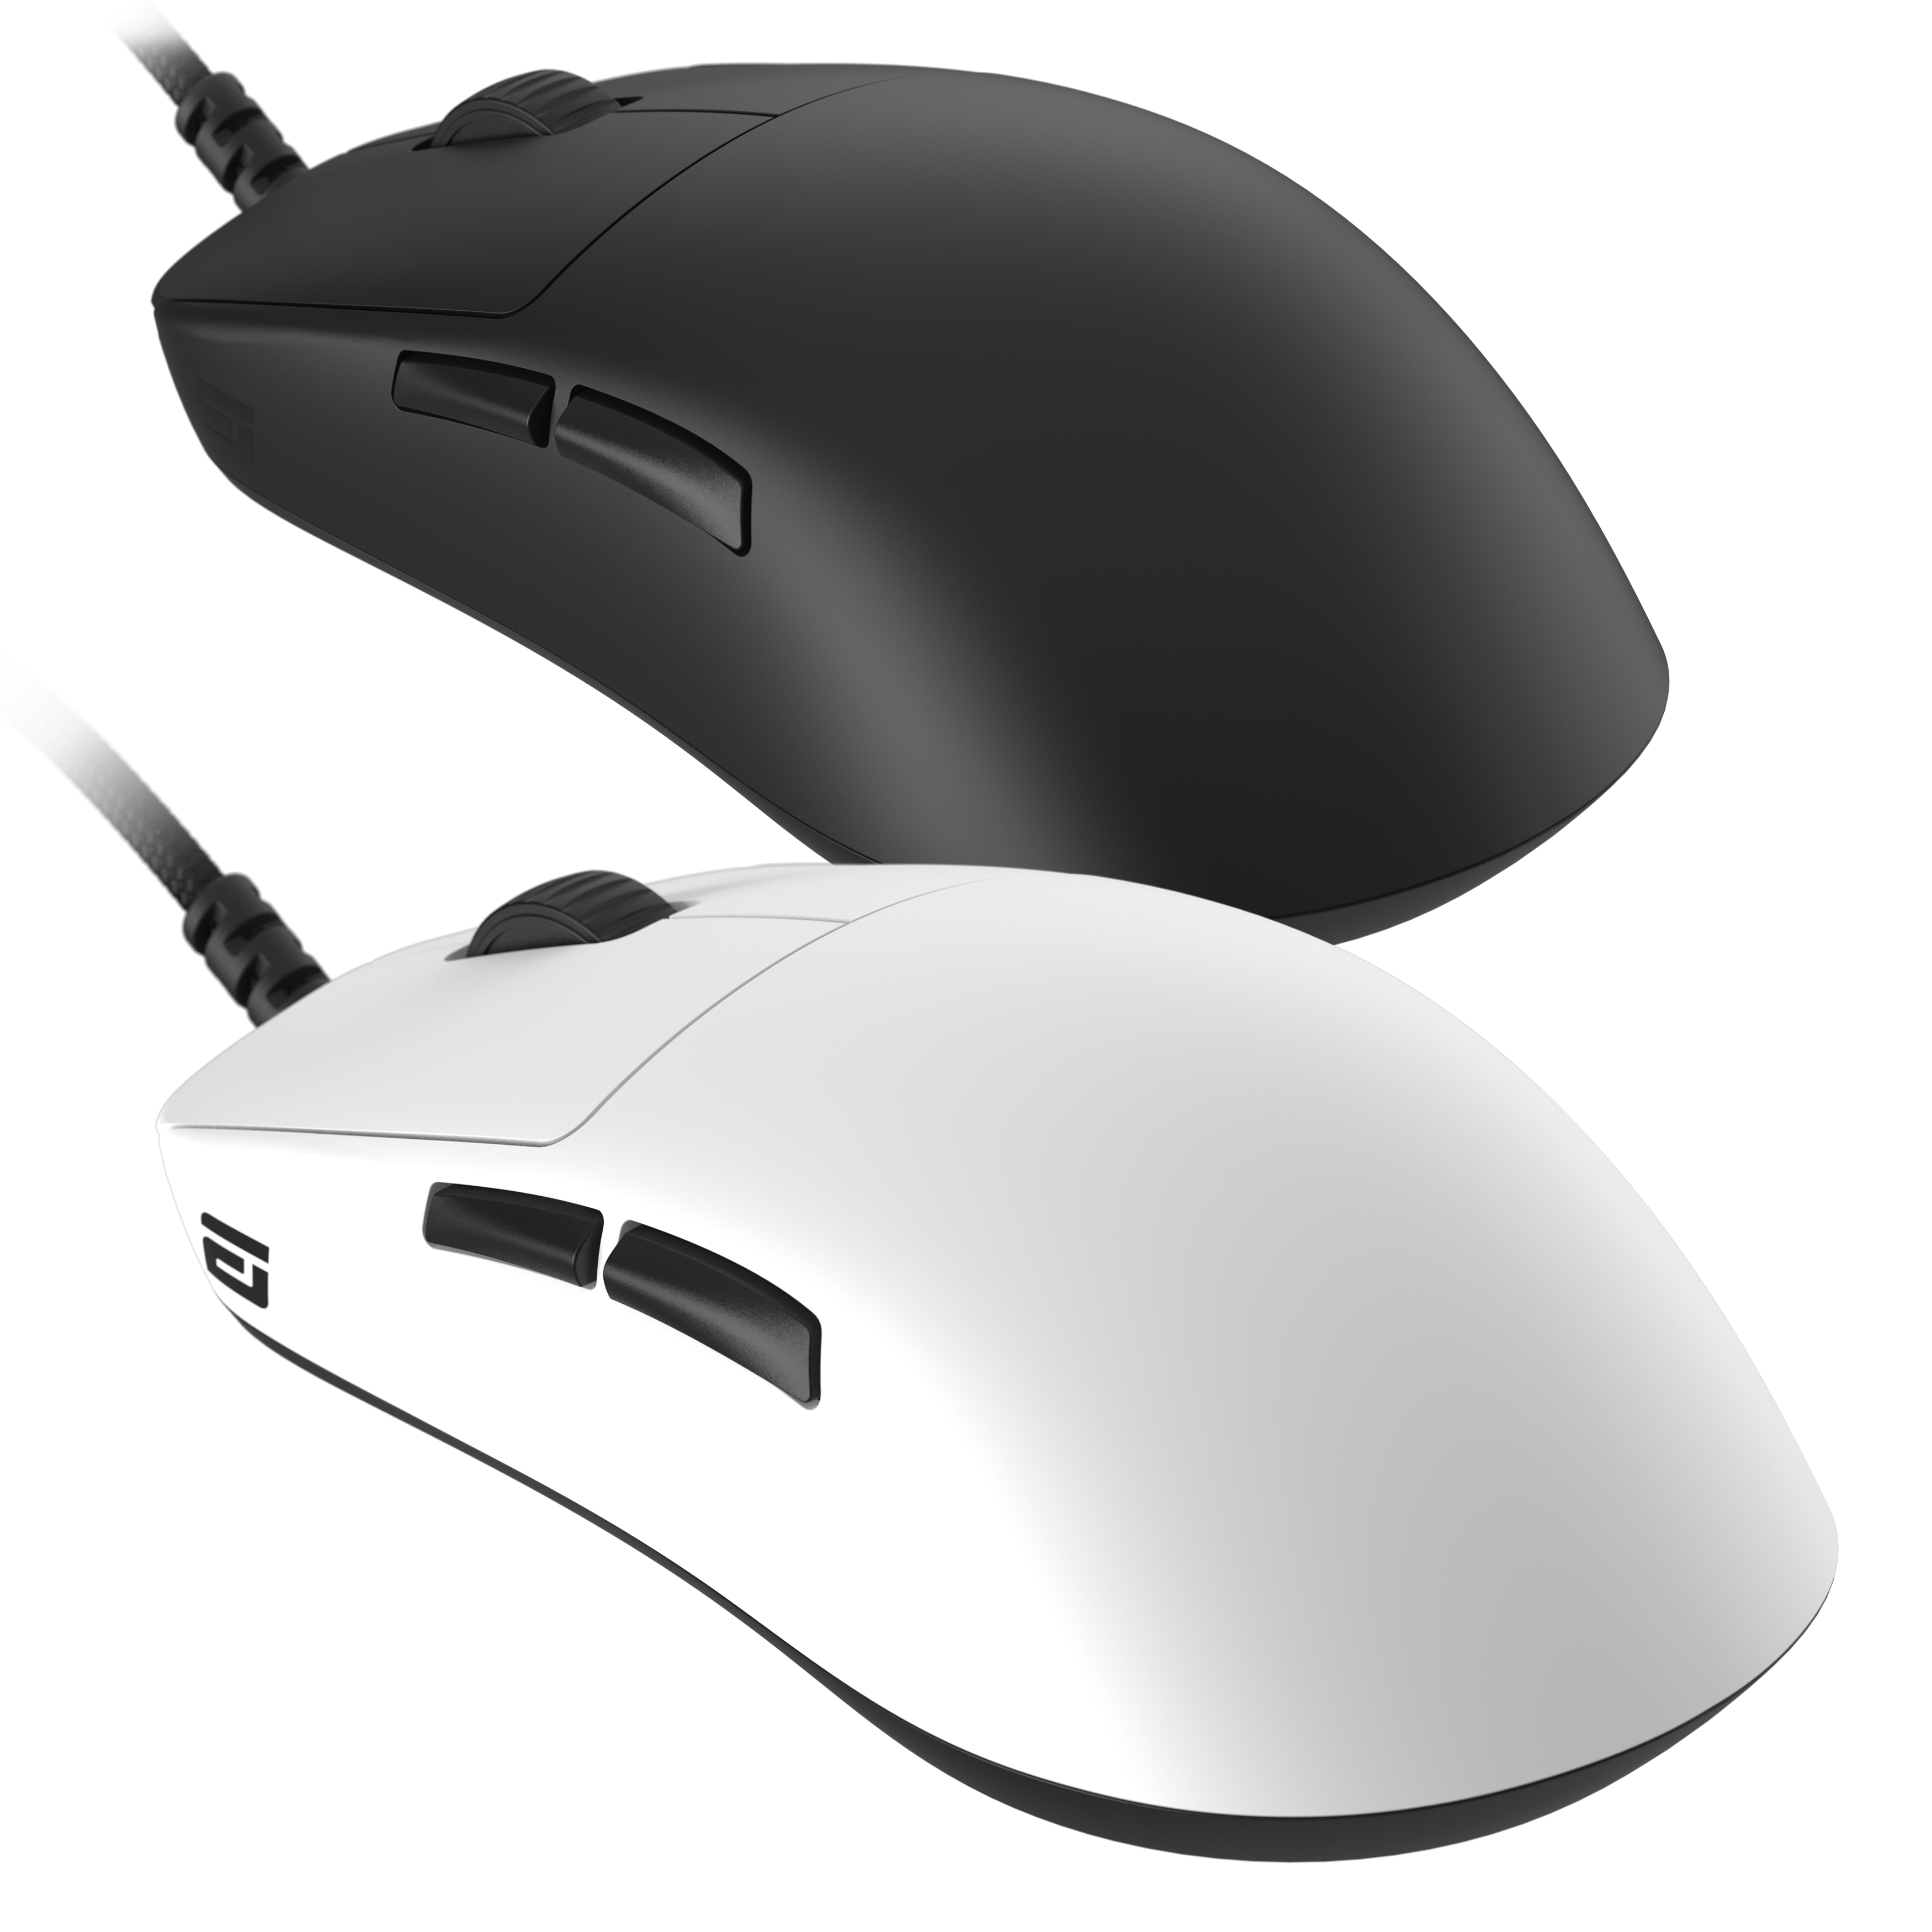 Endgame Gear OP1 Gaming Mouse Black or White